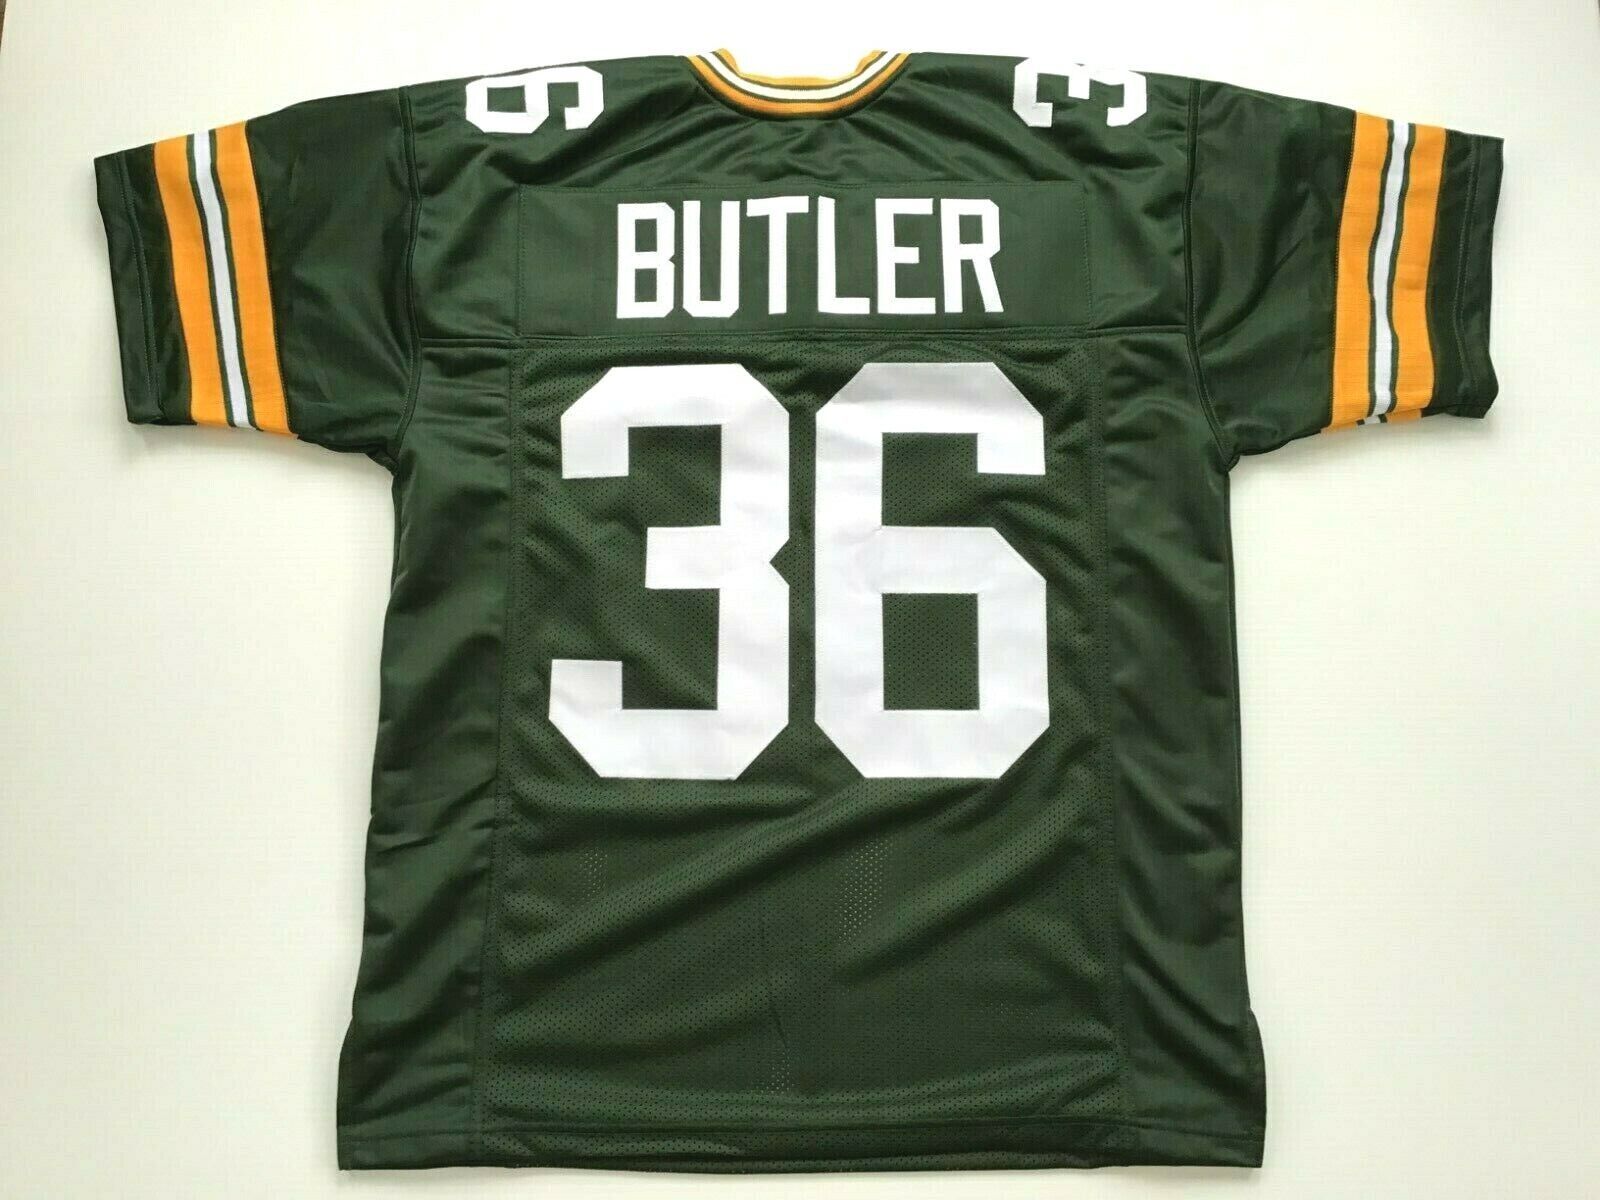 UNSIGNED CUSTOM Sewn Stitched LeRoy Butler Jersey - M, L, XL, 2XL